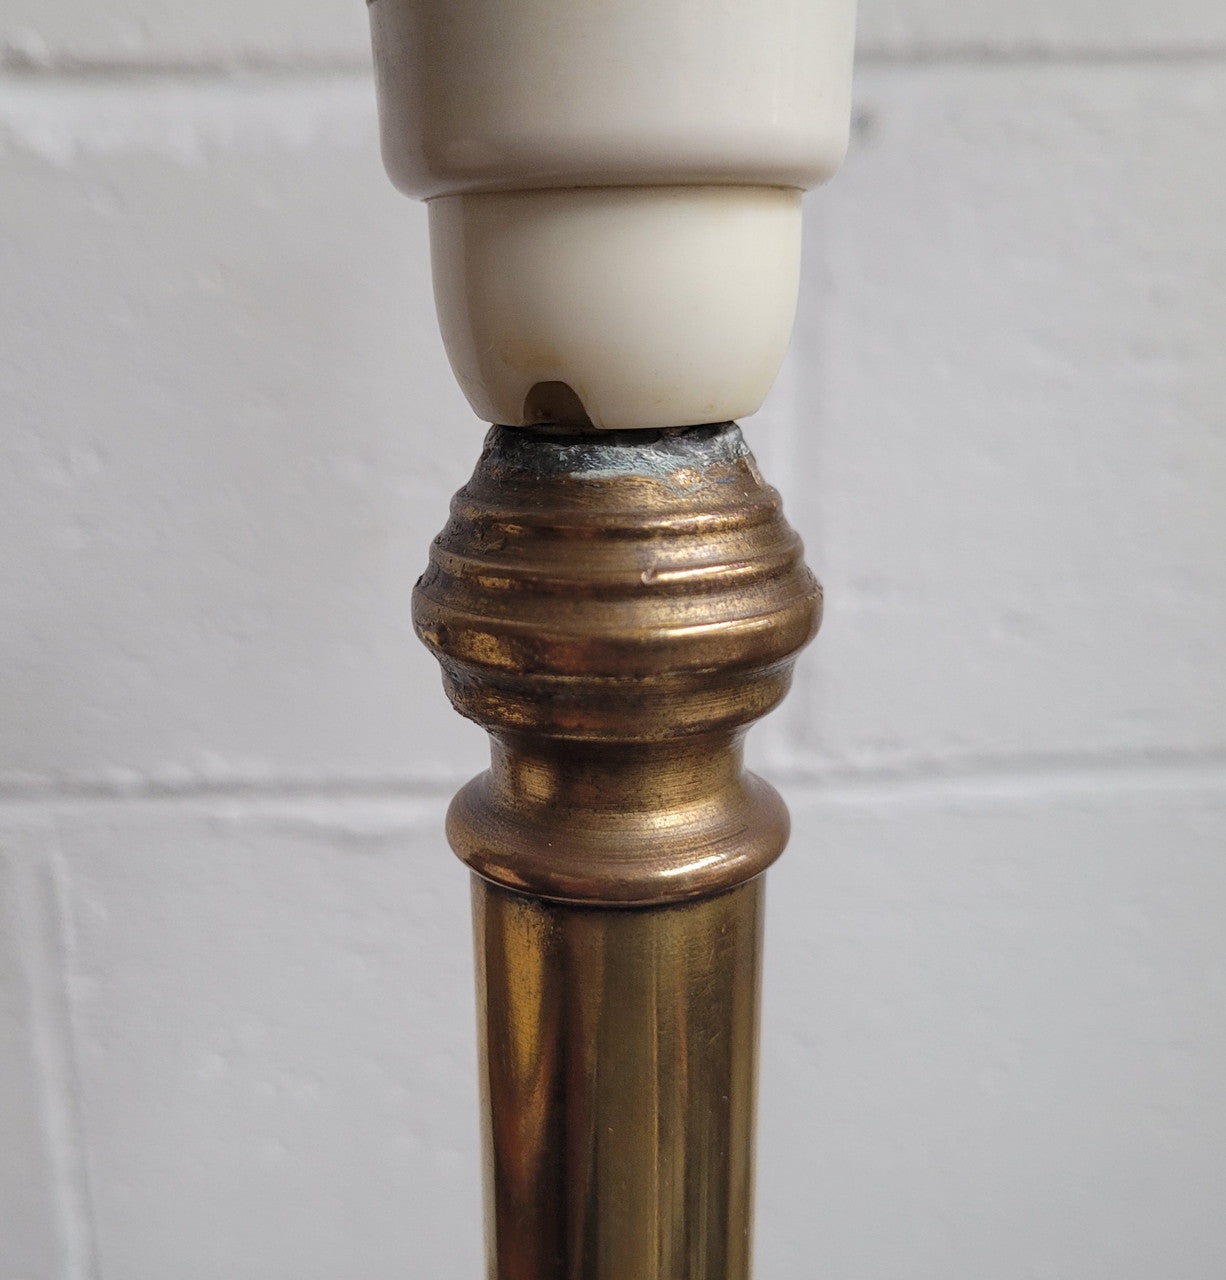 Tall Art Deco Table Lamp – Brass on Wooden Base